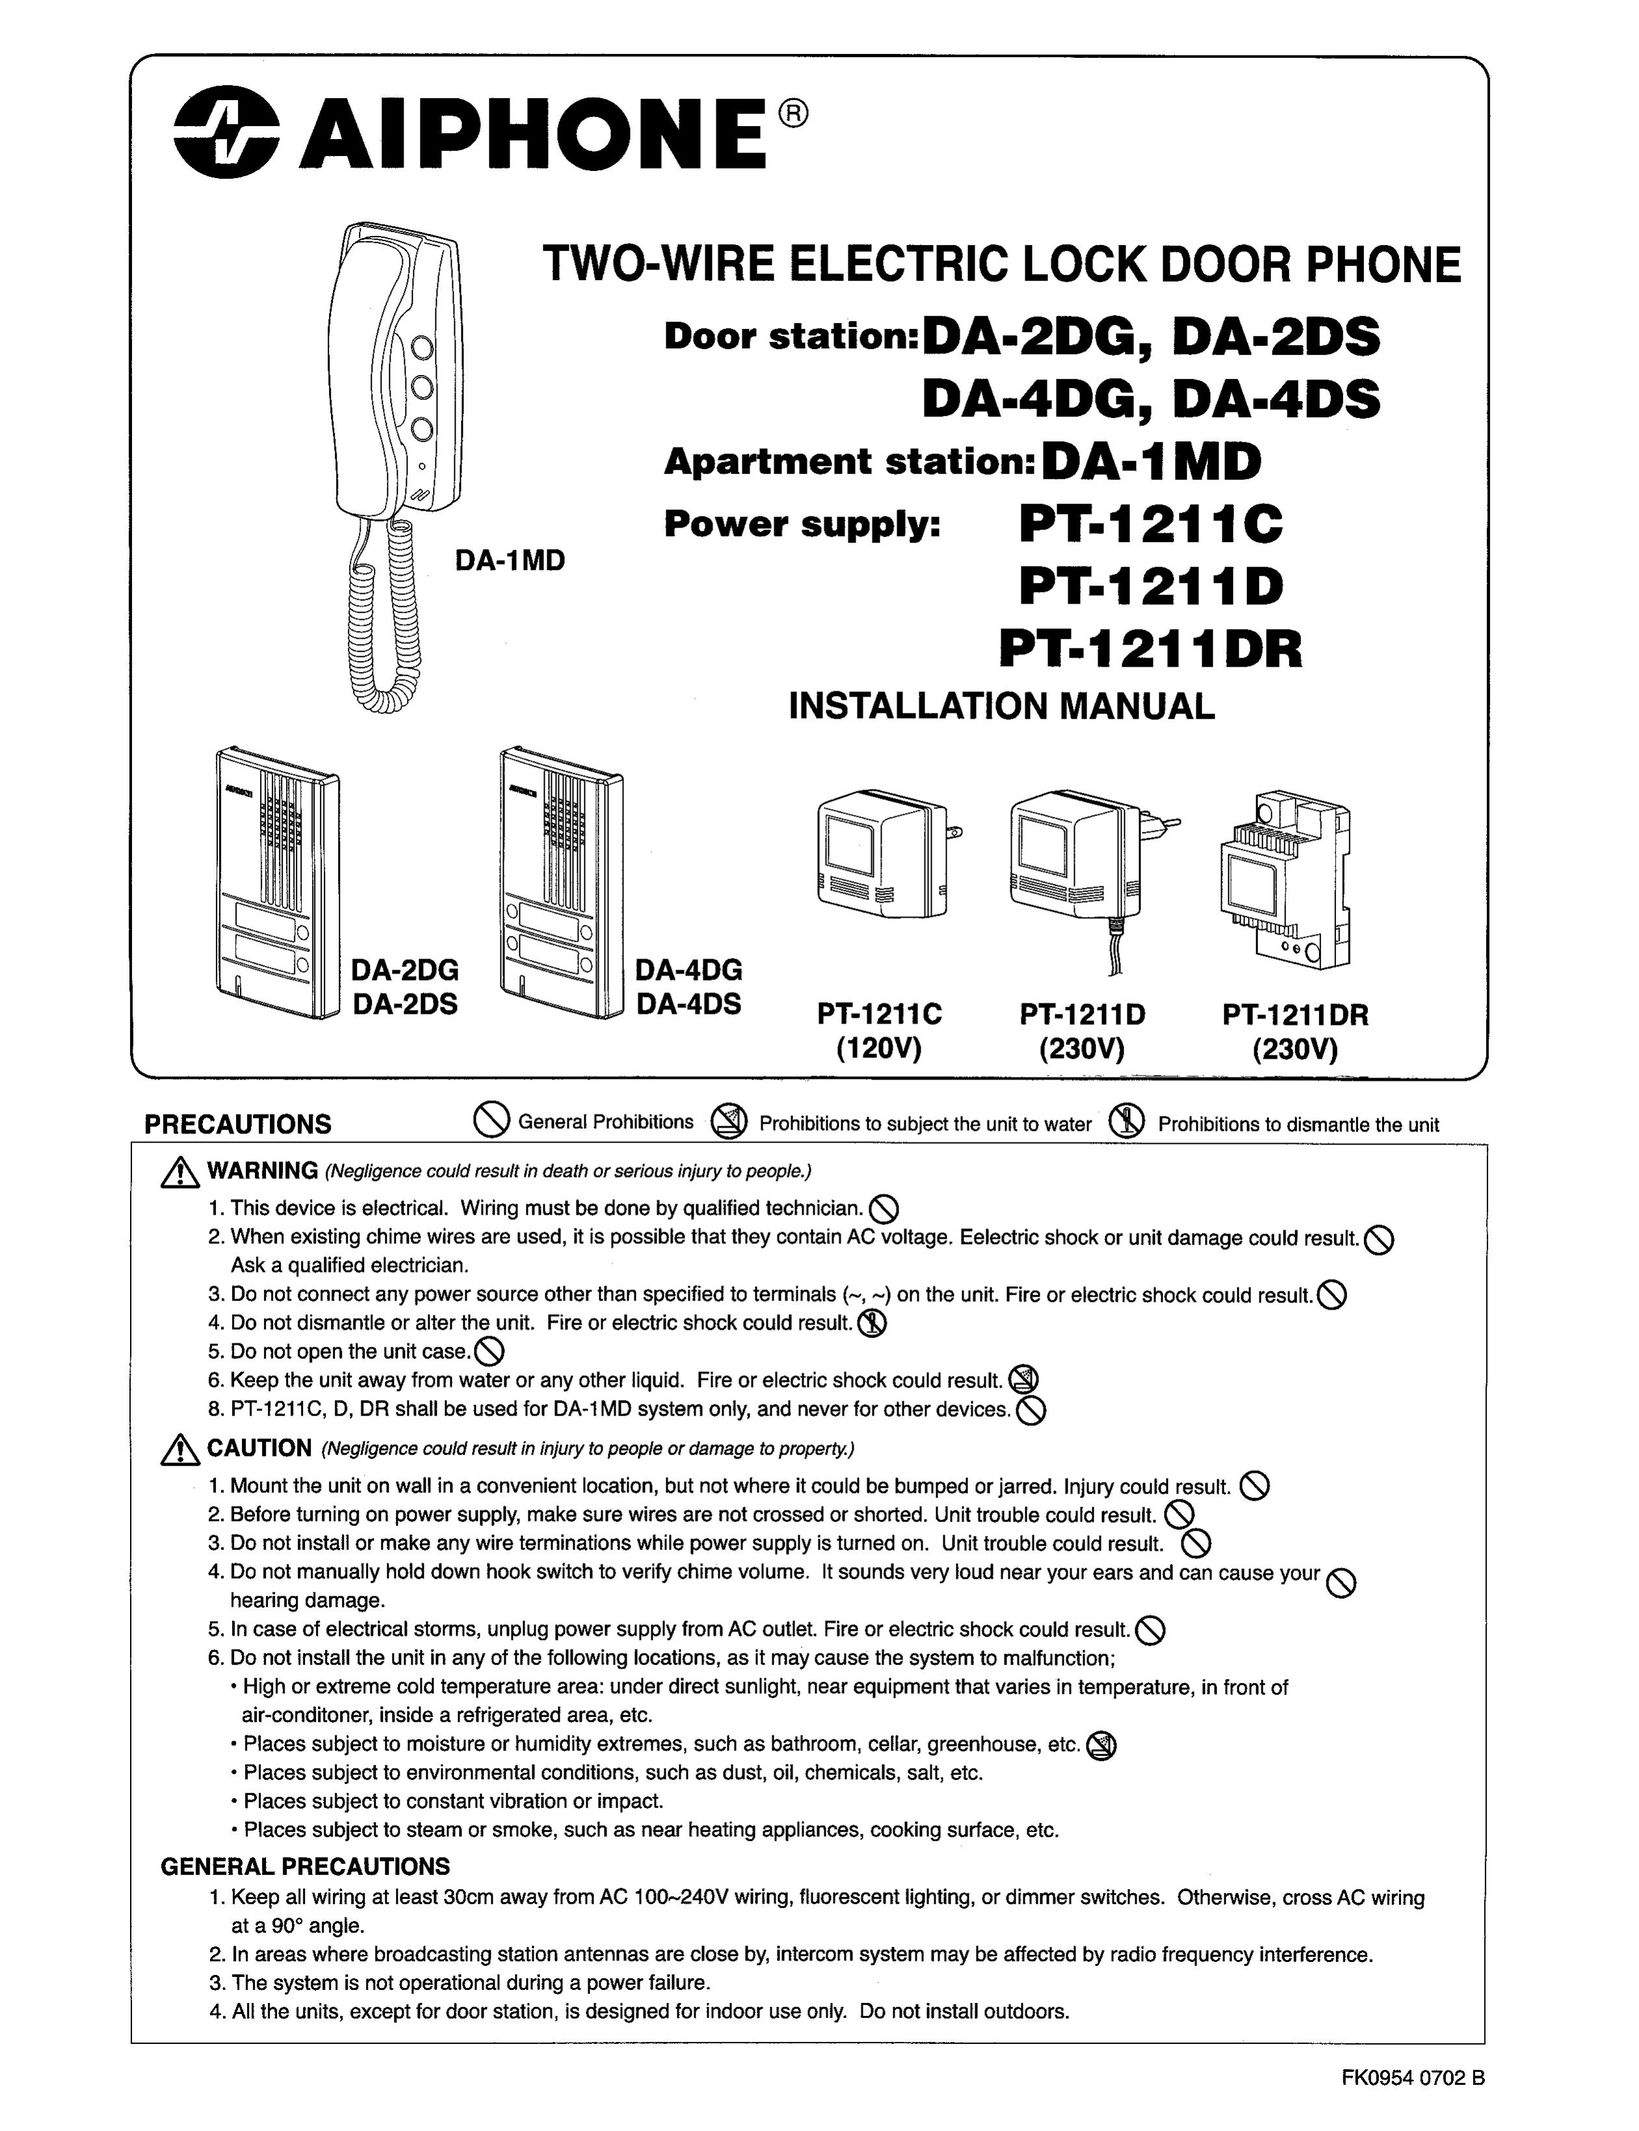 Aiphone DA-4DS Home Security System User Manual